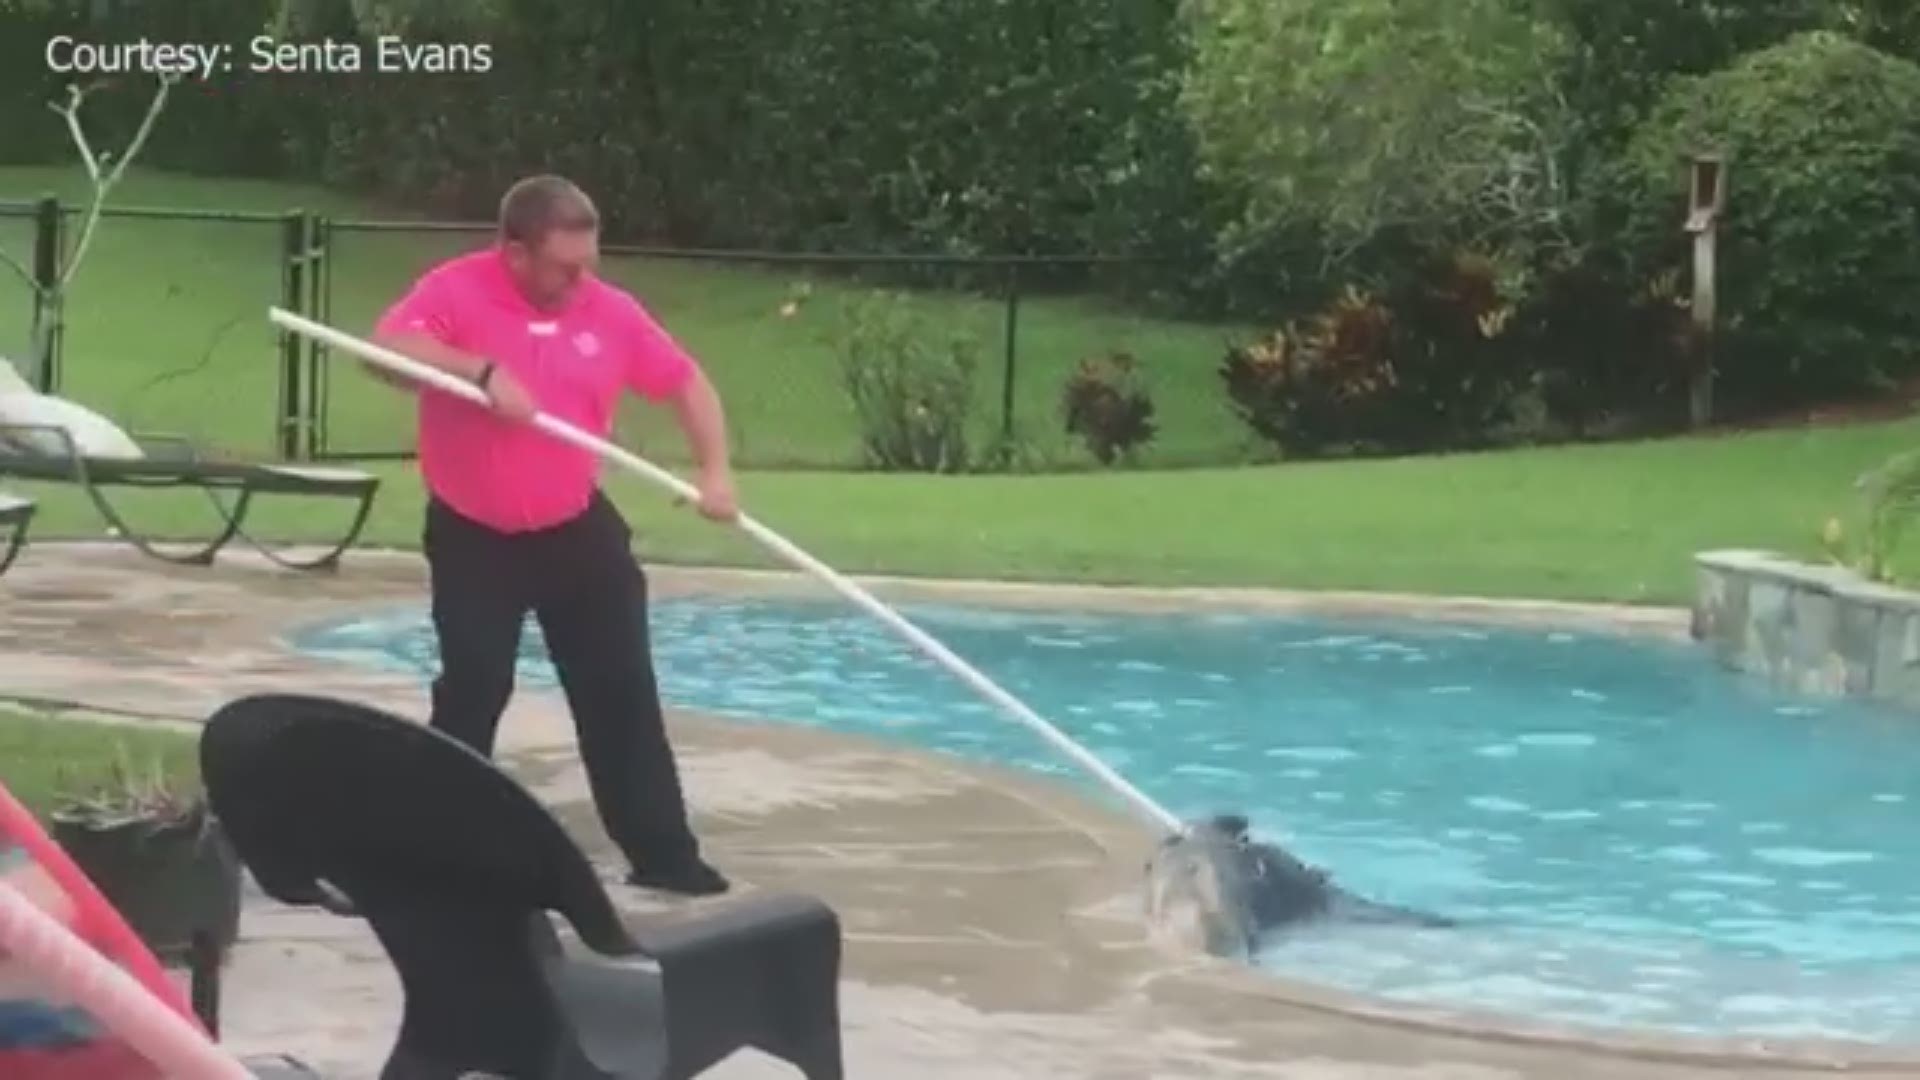 Senta Evans took this video of an alligator being removed from her swimming pool.